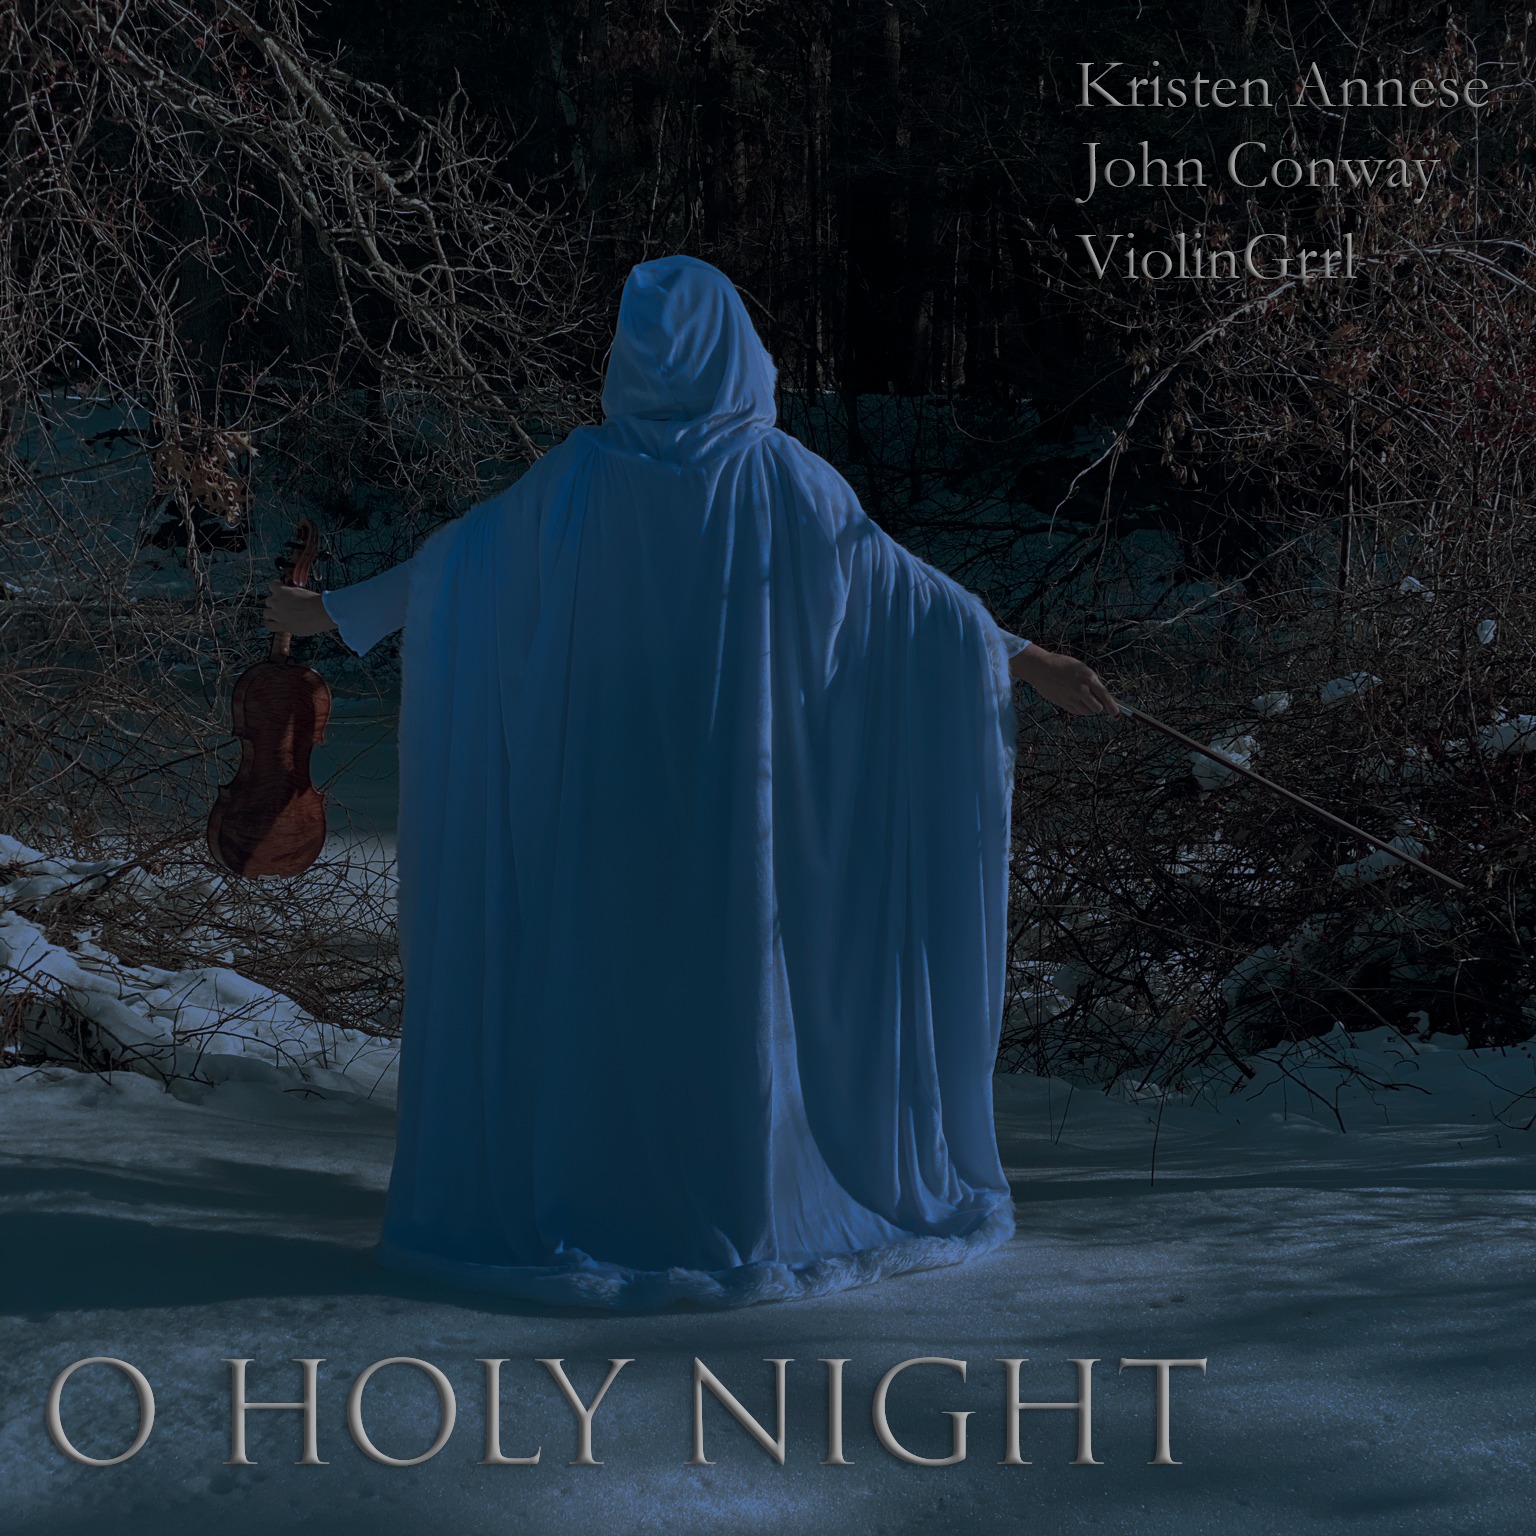 Inspiring Wonder with an Entrancing Sonic Spectacle - ViolinGrrl’s Mesmerizes Listeners with New Melody "O Holy Night"